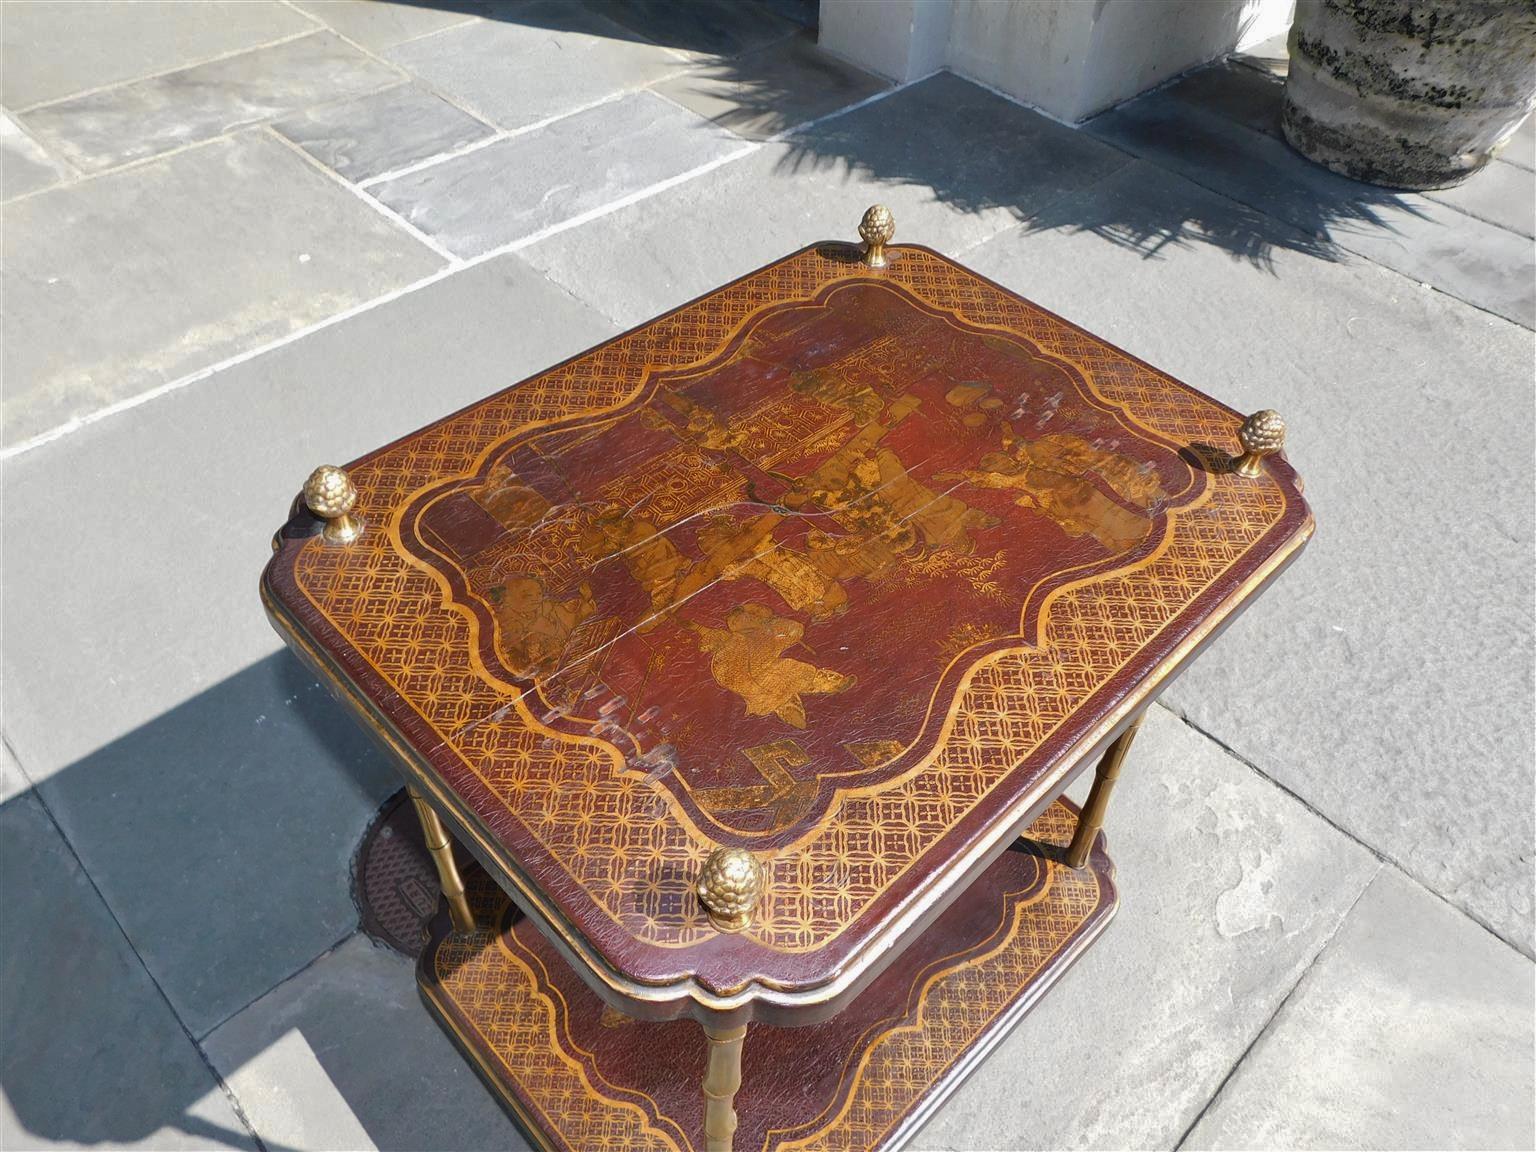 English Chinoiserie & Brass Finial Two Tiered Side Table with Claw Feet, C. 1850 For Sale 2